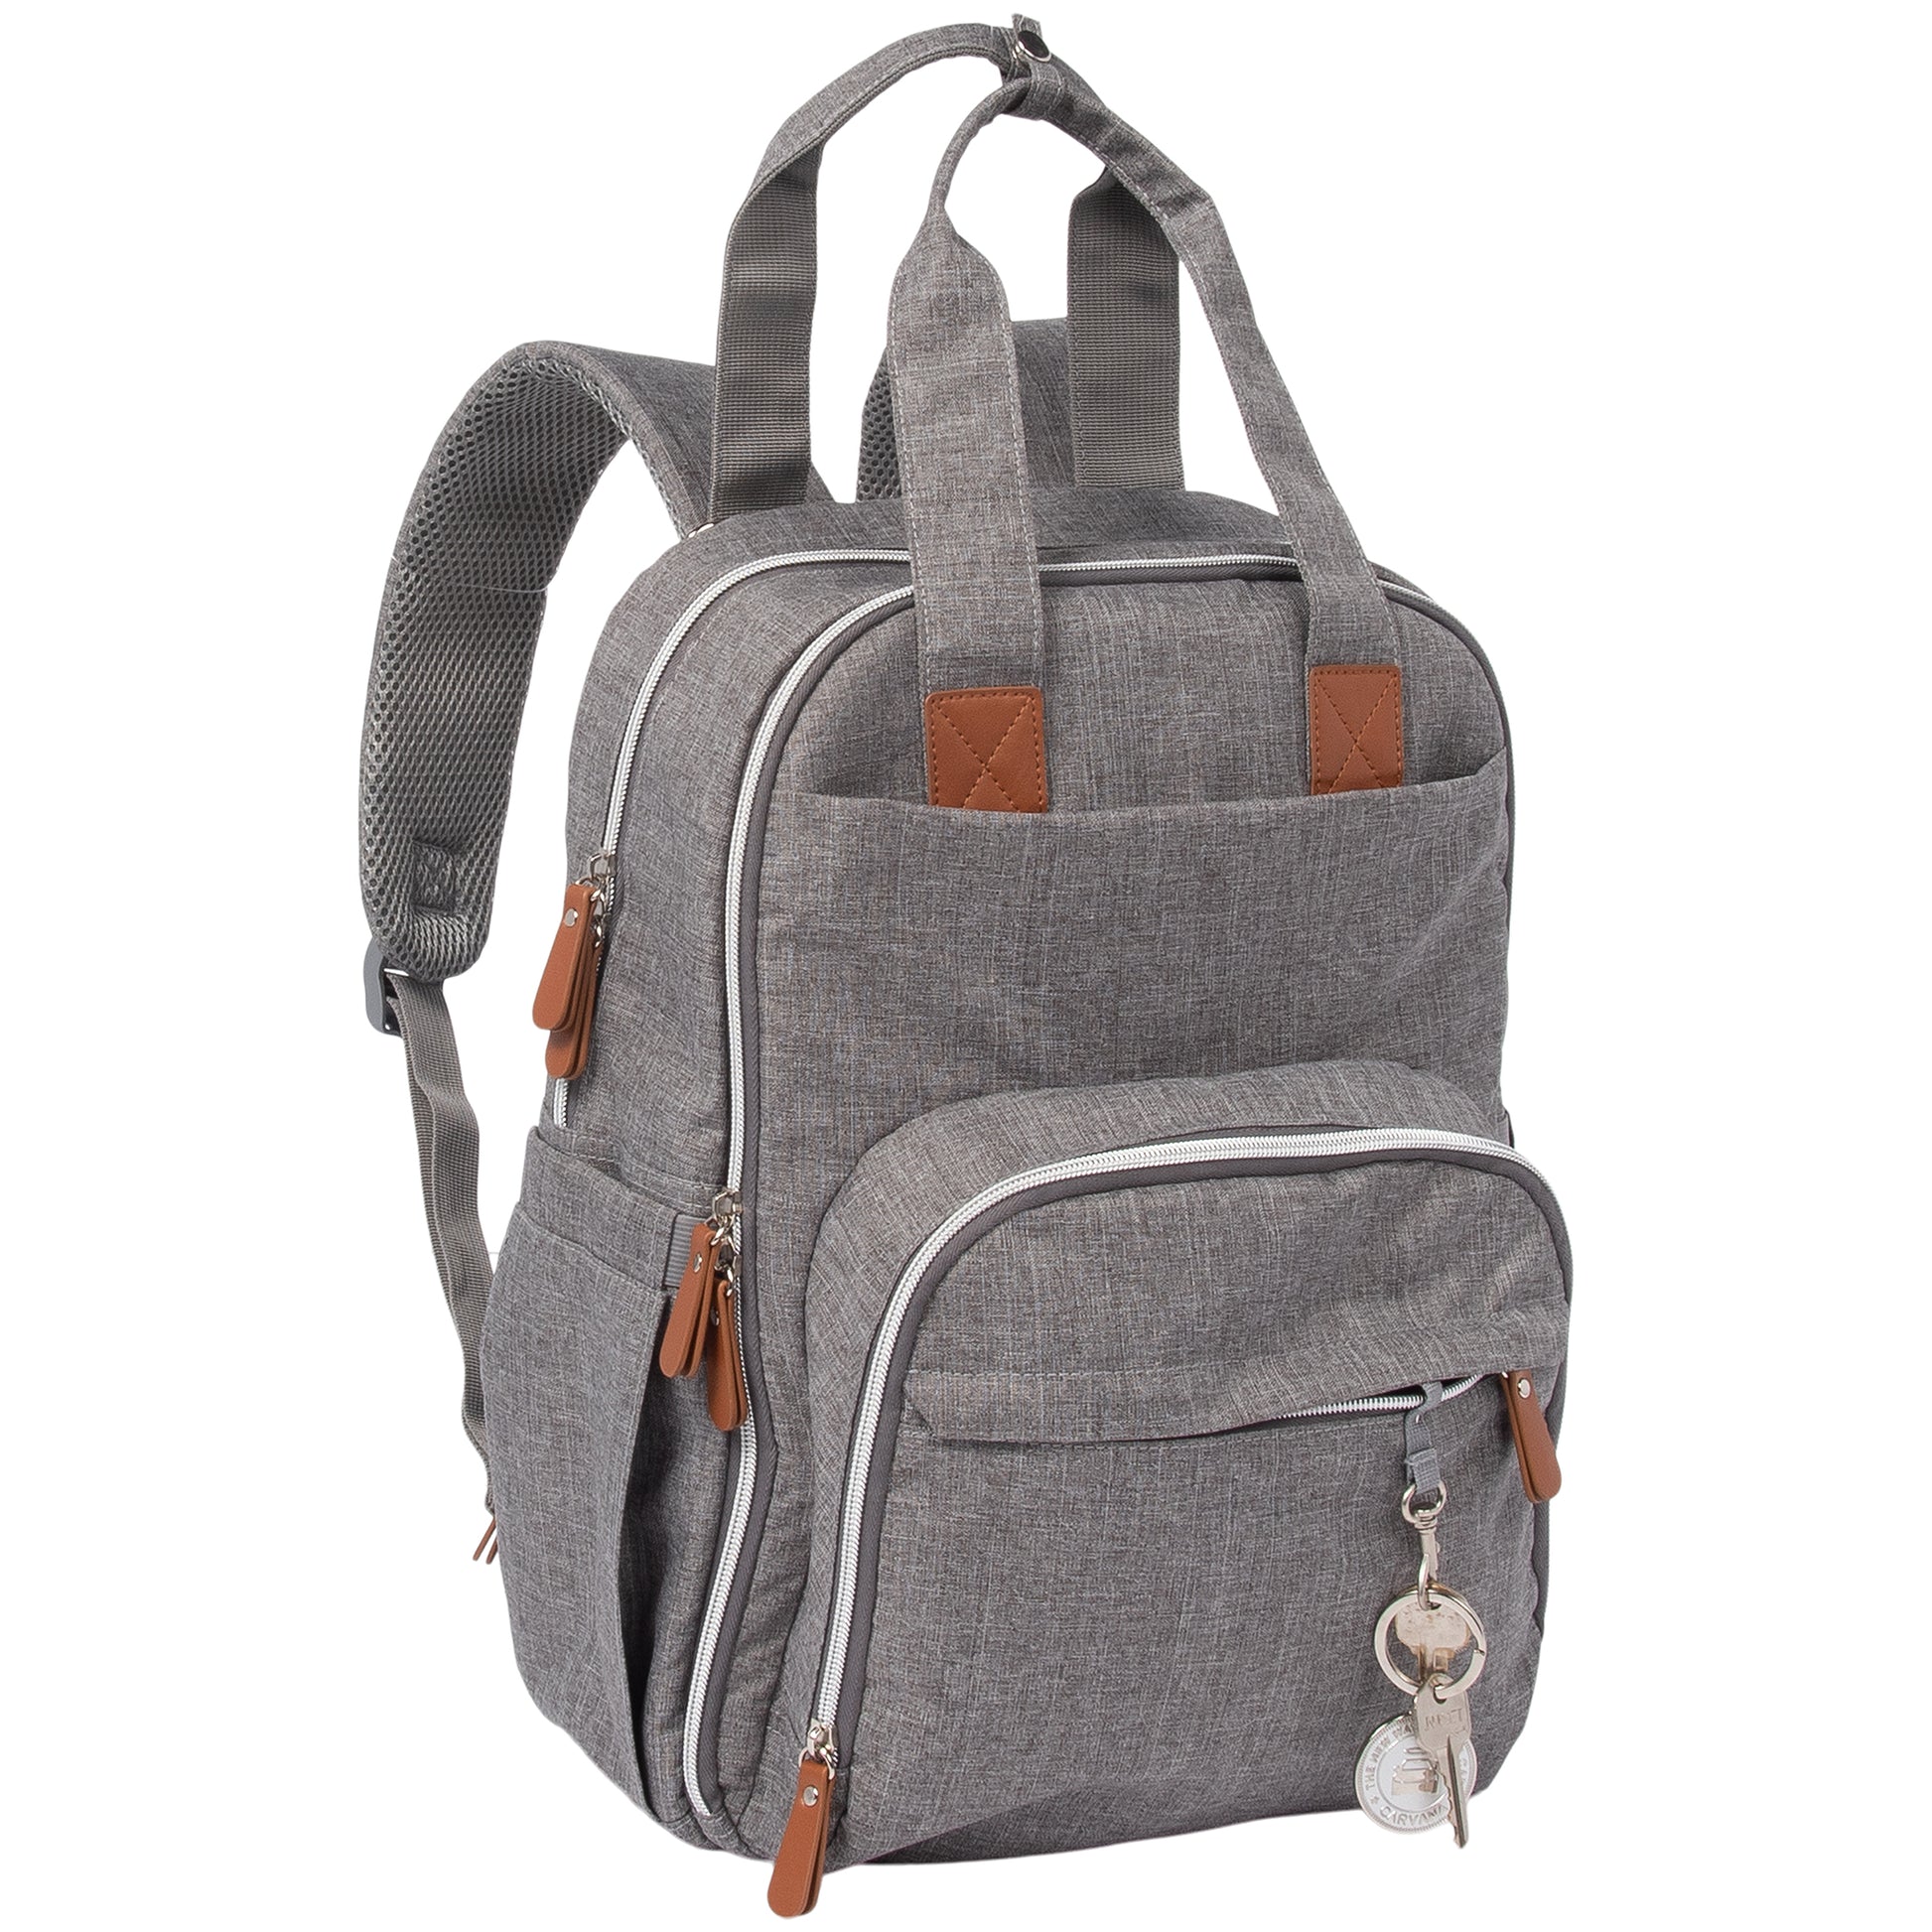 Backpack Diaper Bag - front angle